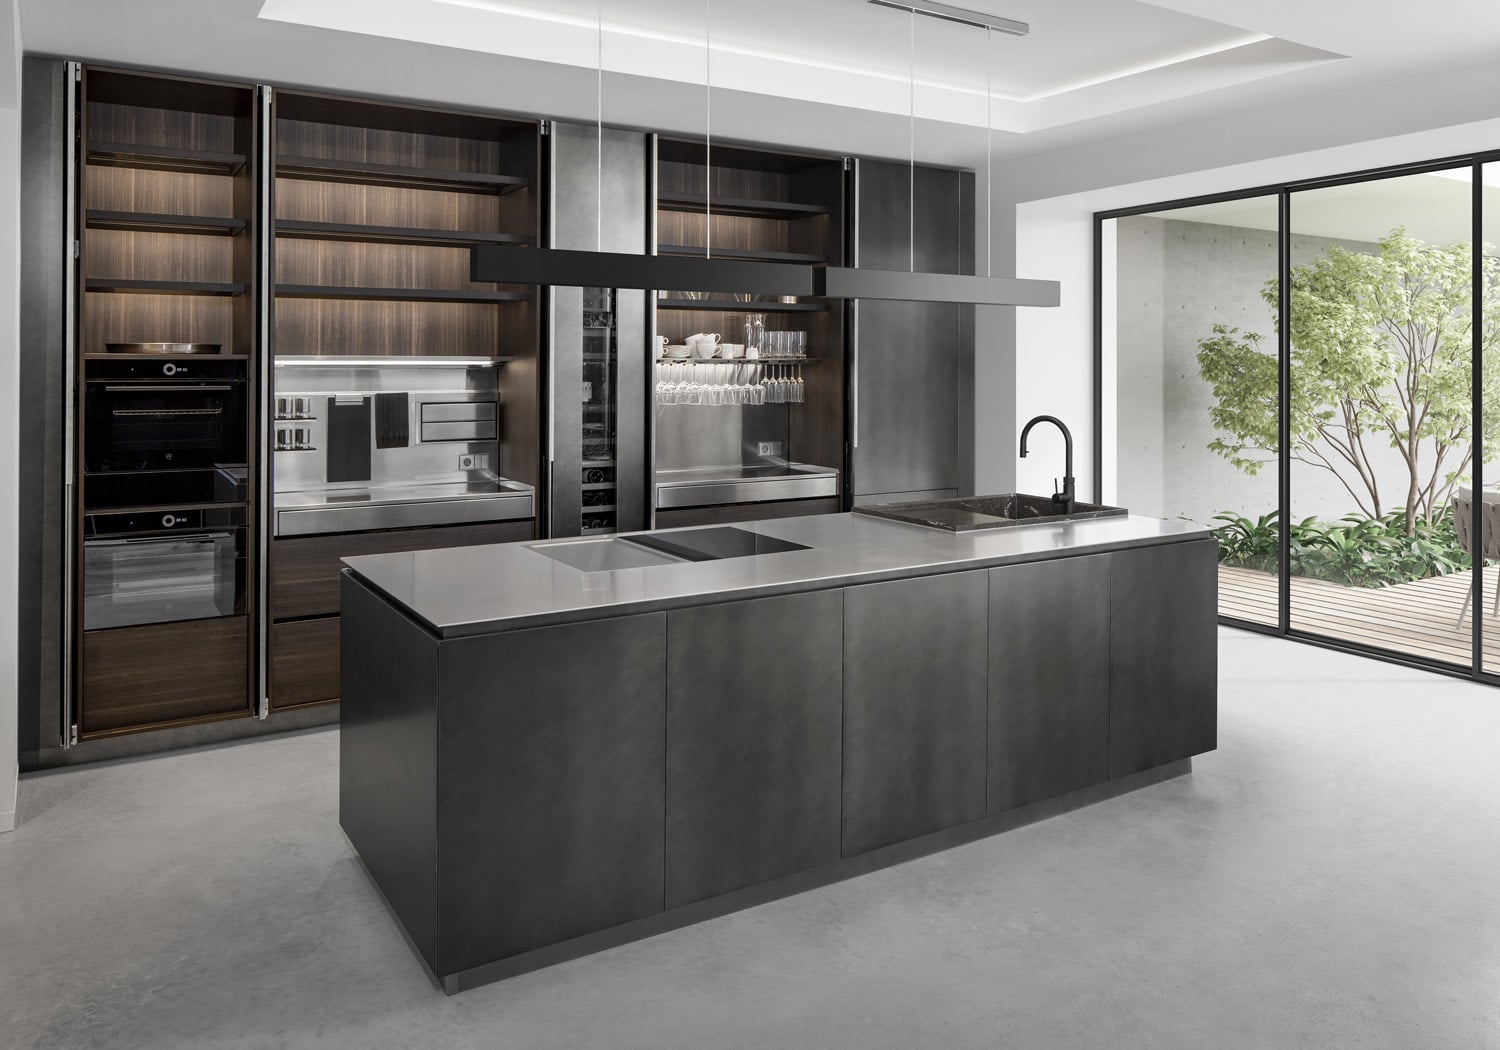 Bespoke contemporary kitchen design with cabinets in lacquered Oxidized Steel metal, countertop in stainless steel with matte finish, and interiors in Eukalipto melamine.